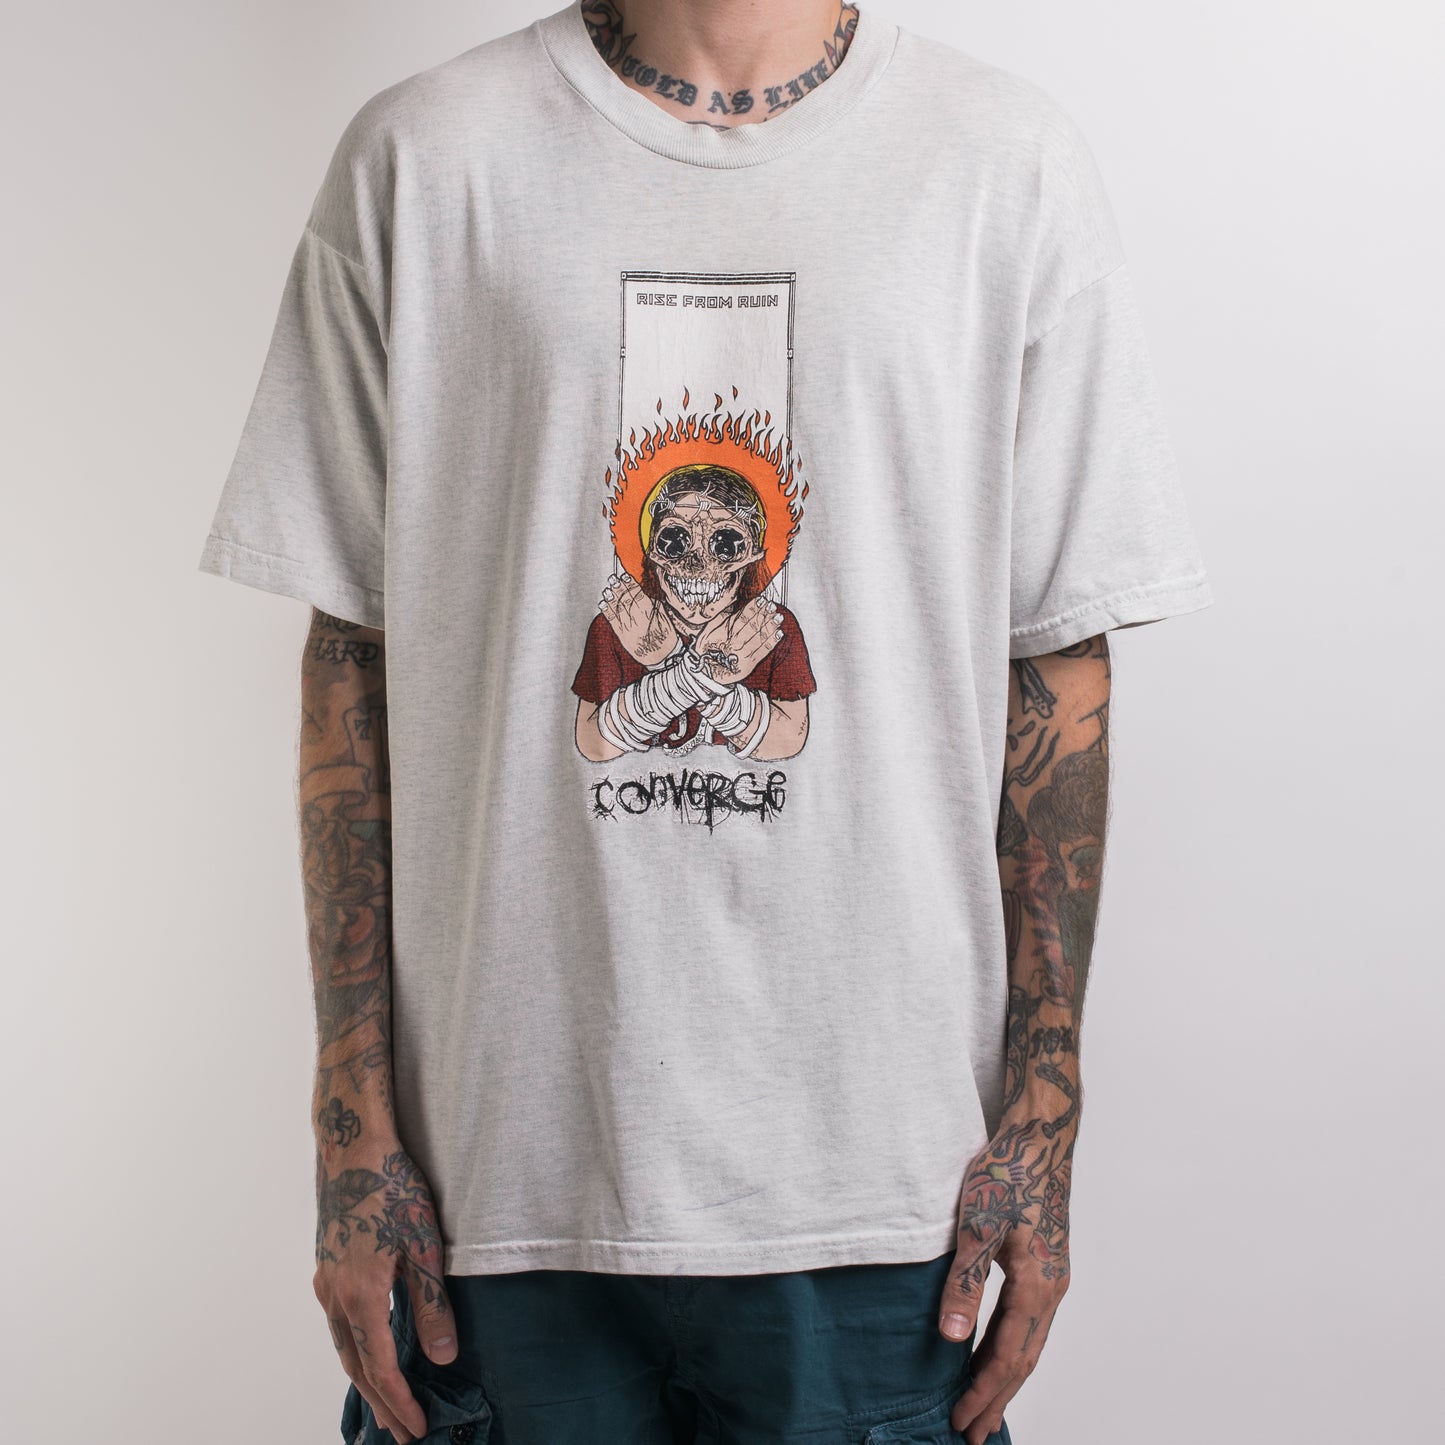 Vintage 90’s Converge Rise From Ruins T-Shirt